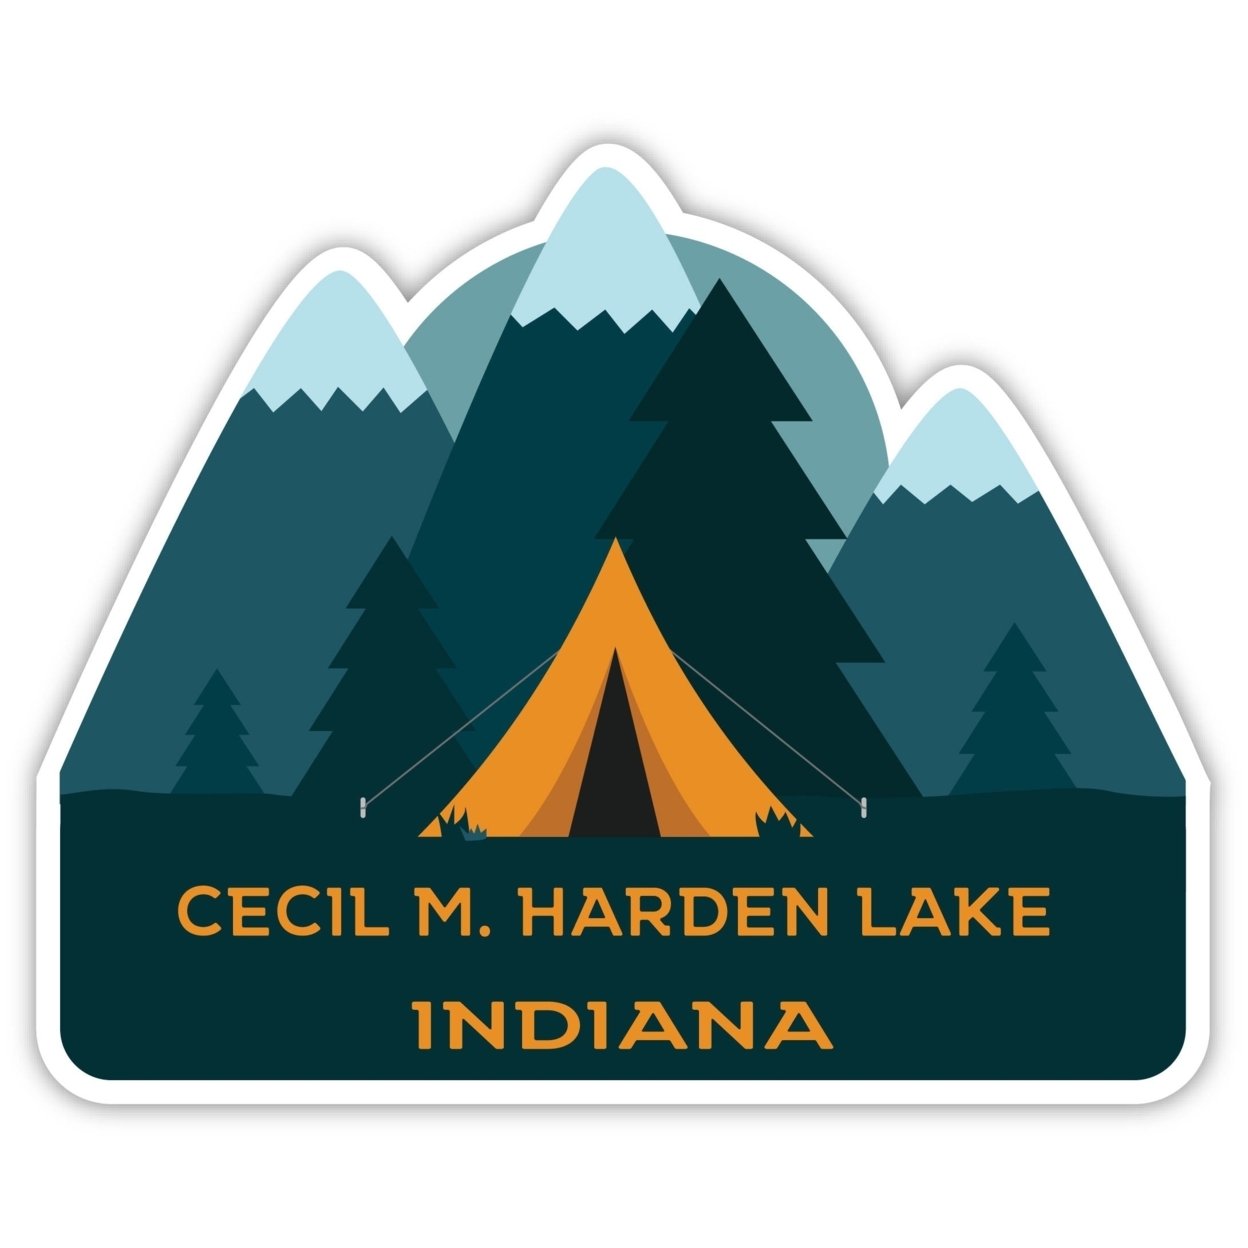 Cecil M. Harden Lake Indiana Souvenir Decorative Stickers (Choose Theme And Size) - 4-Pack, 2-Inch, Tent